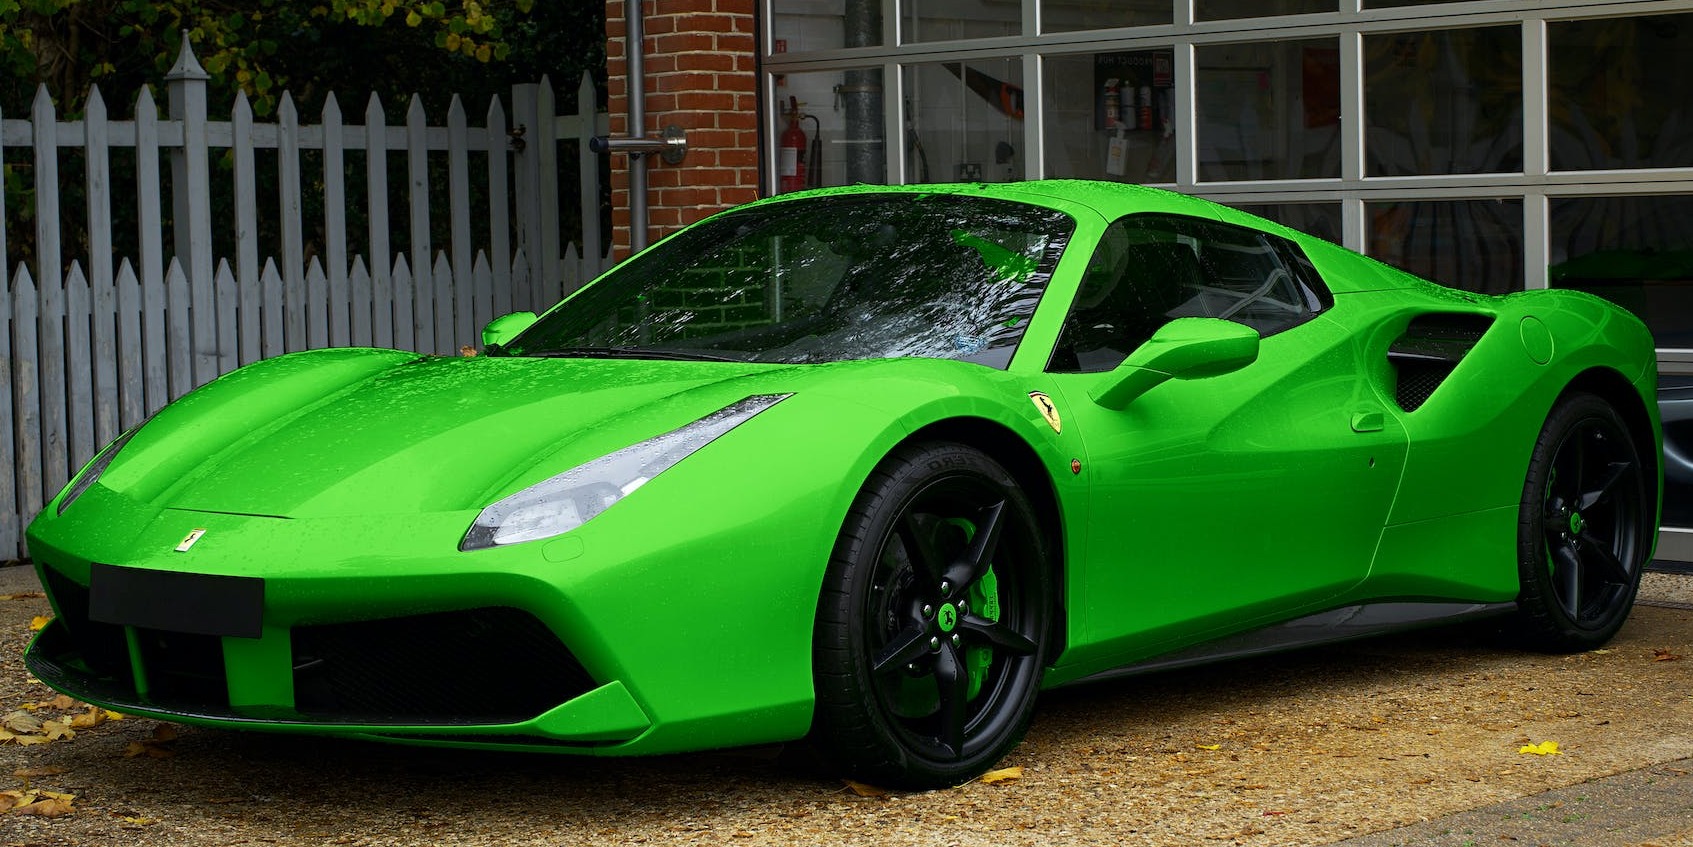 Why Choose a Ferrari for Your Next Supercar Hire in London?